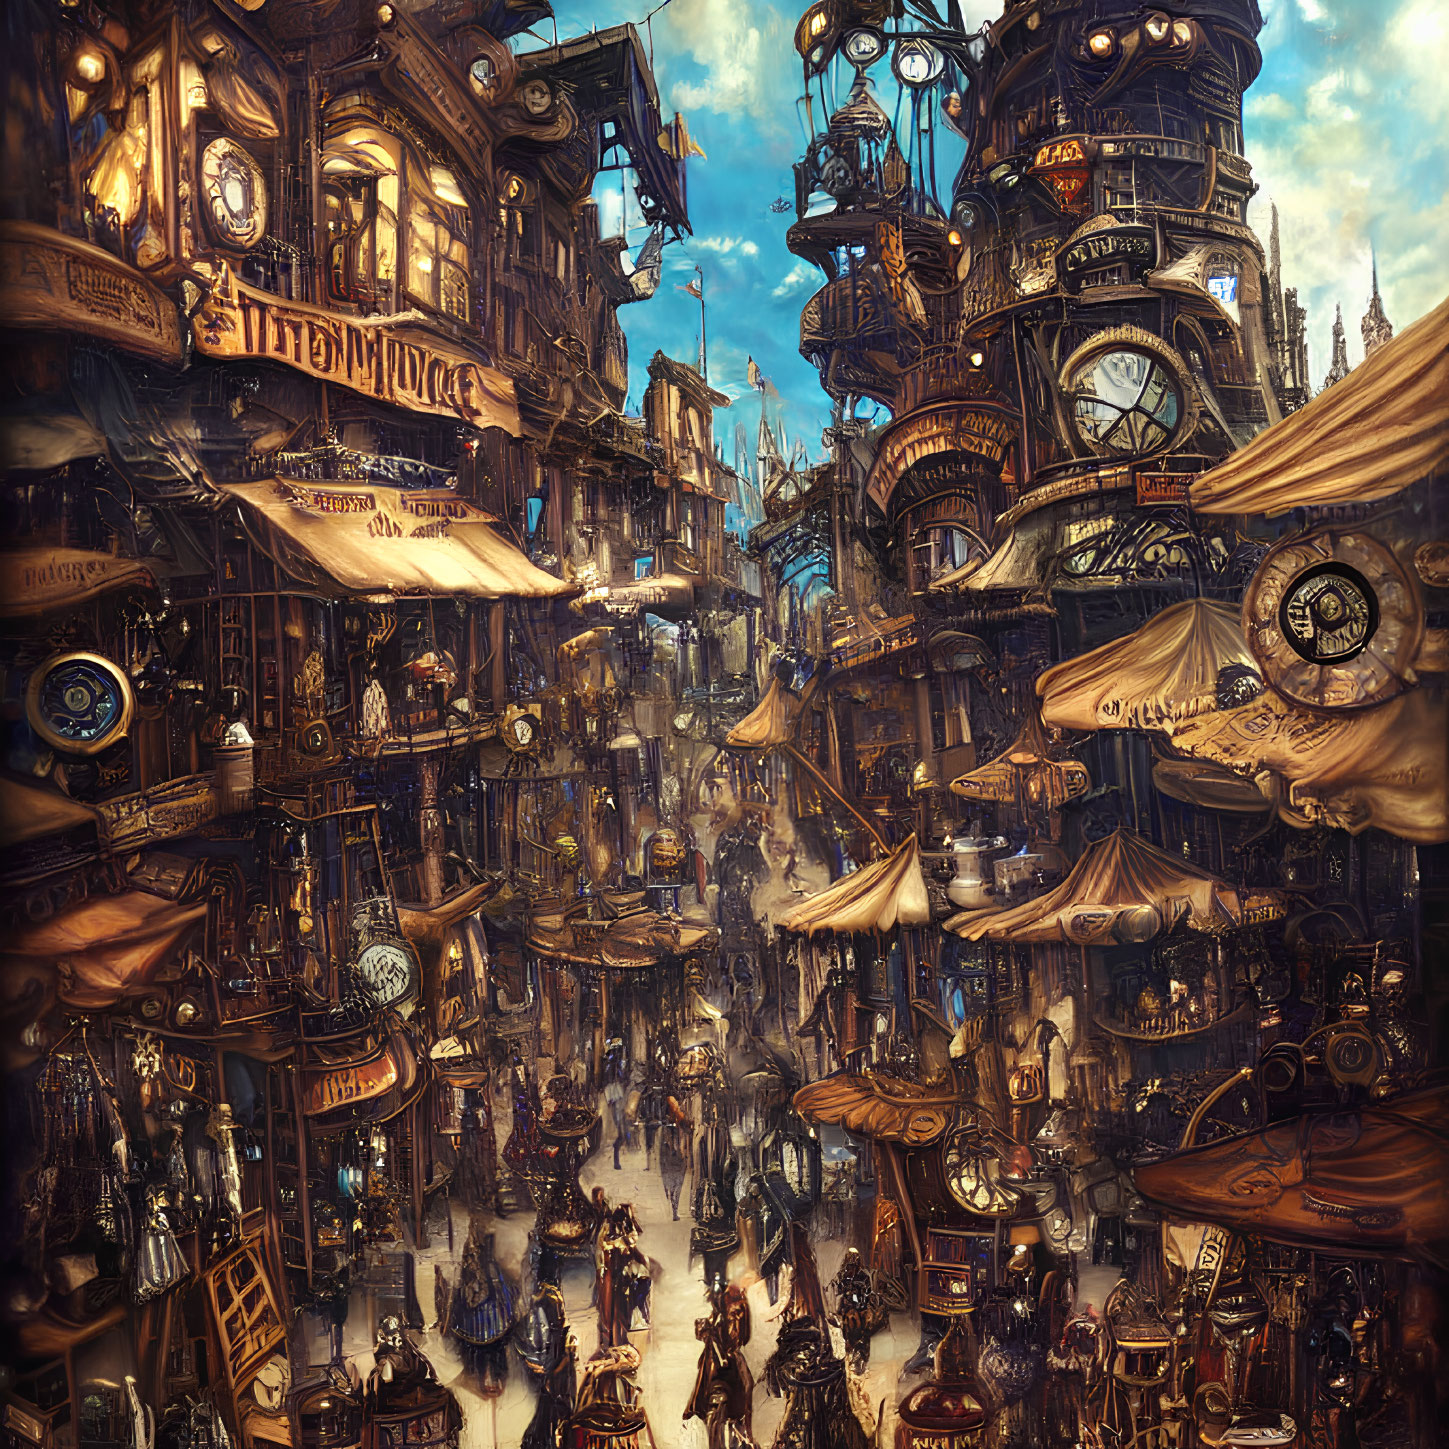 Steampunk cityscape with intricate buildings, cogs, gears, and Victorian-clad citizens.